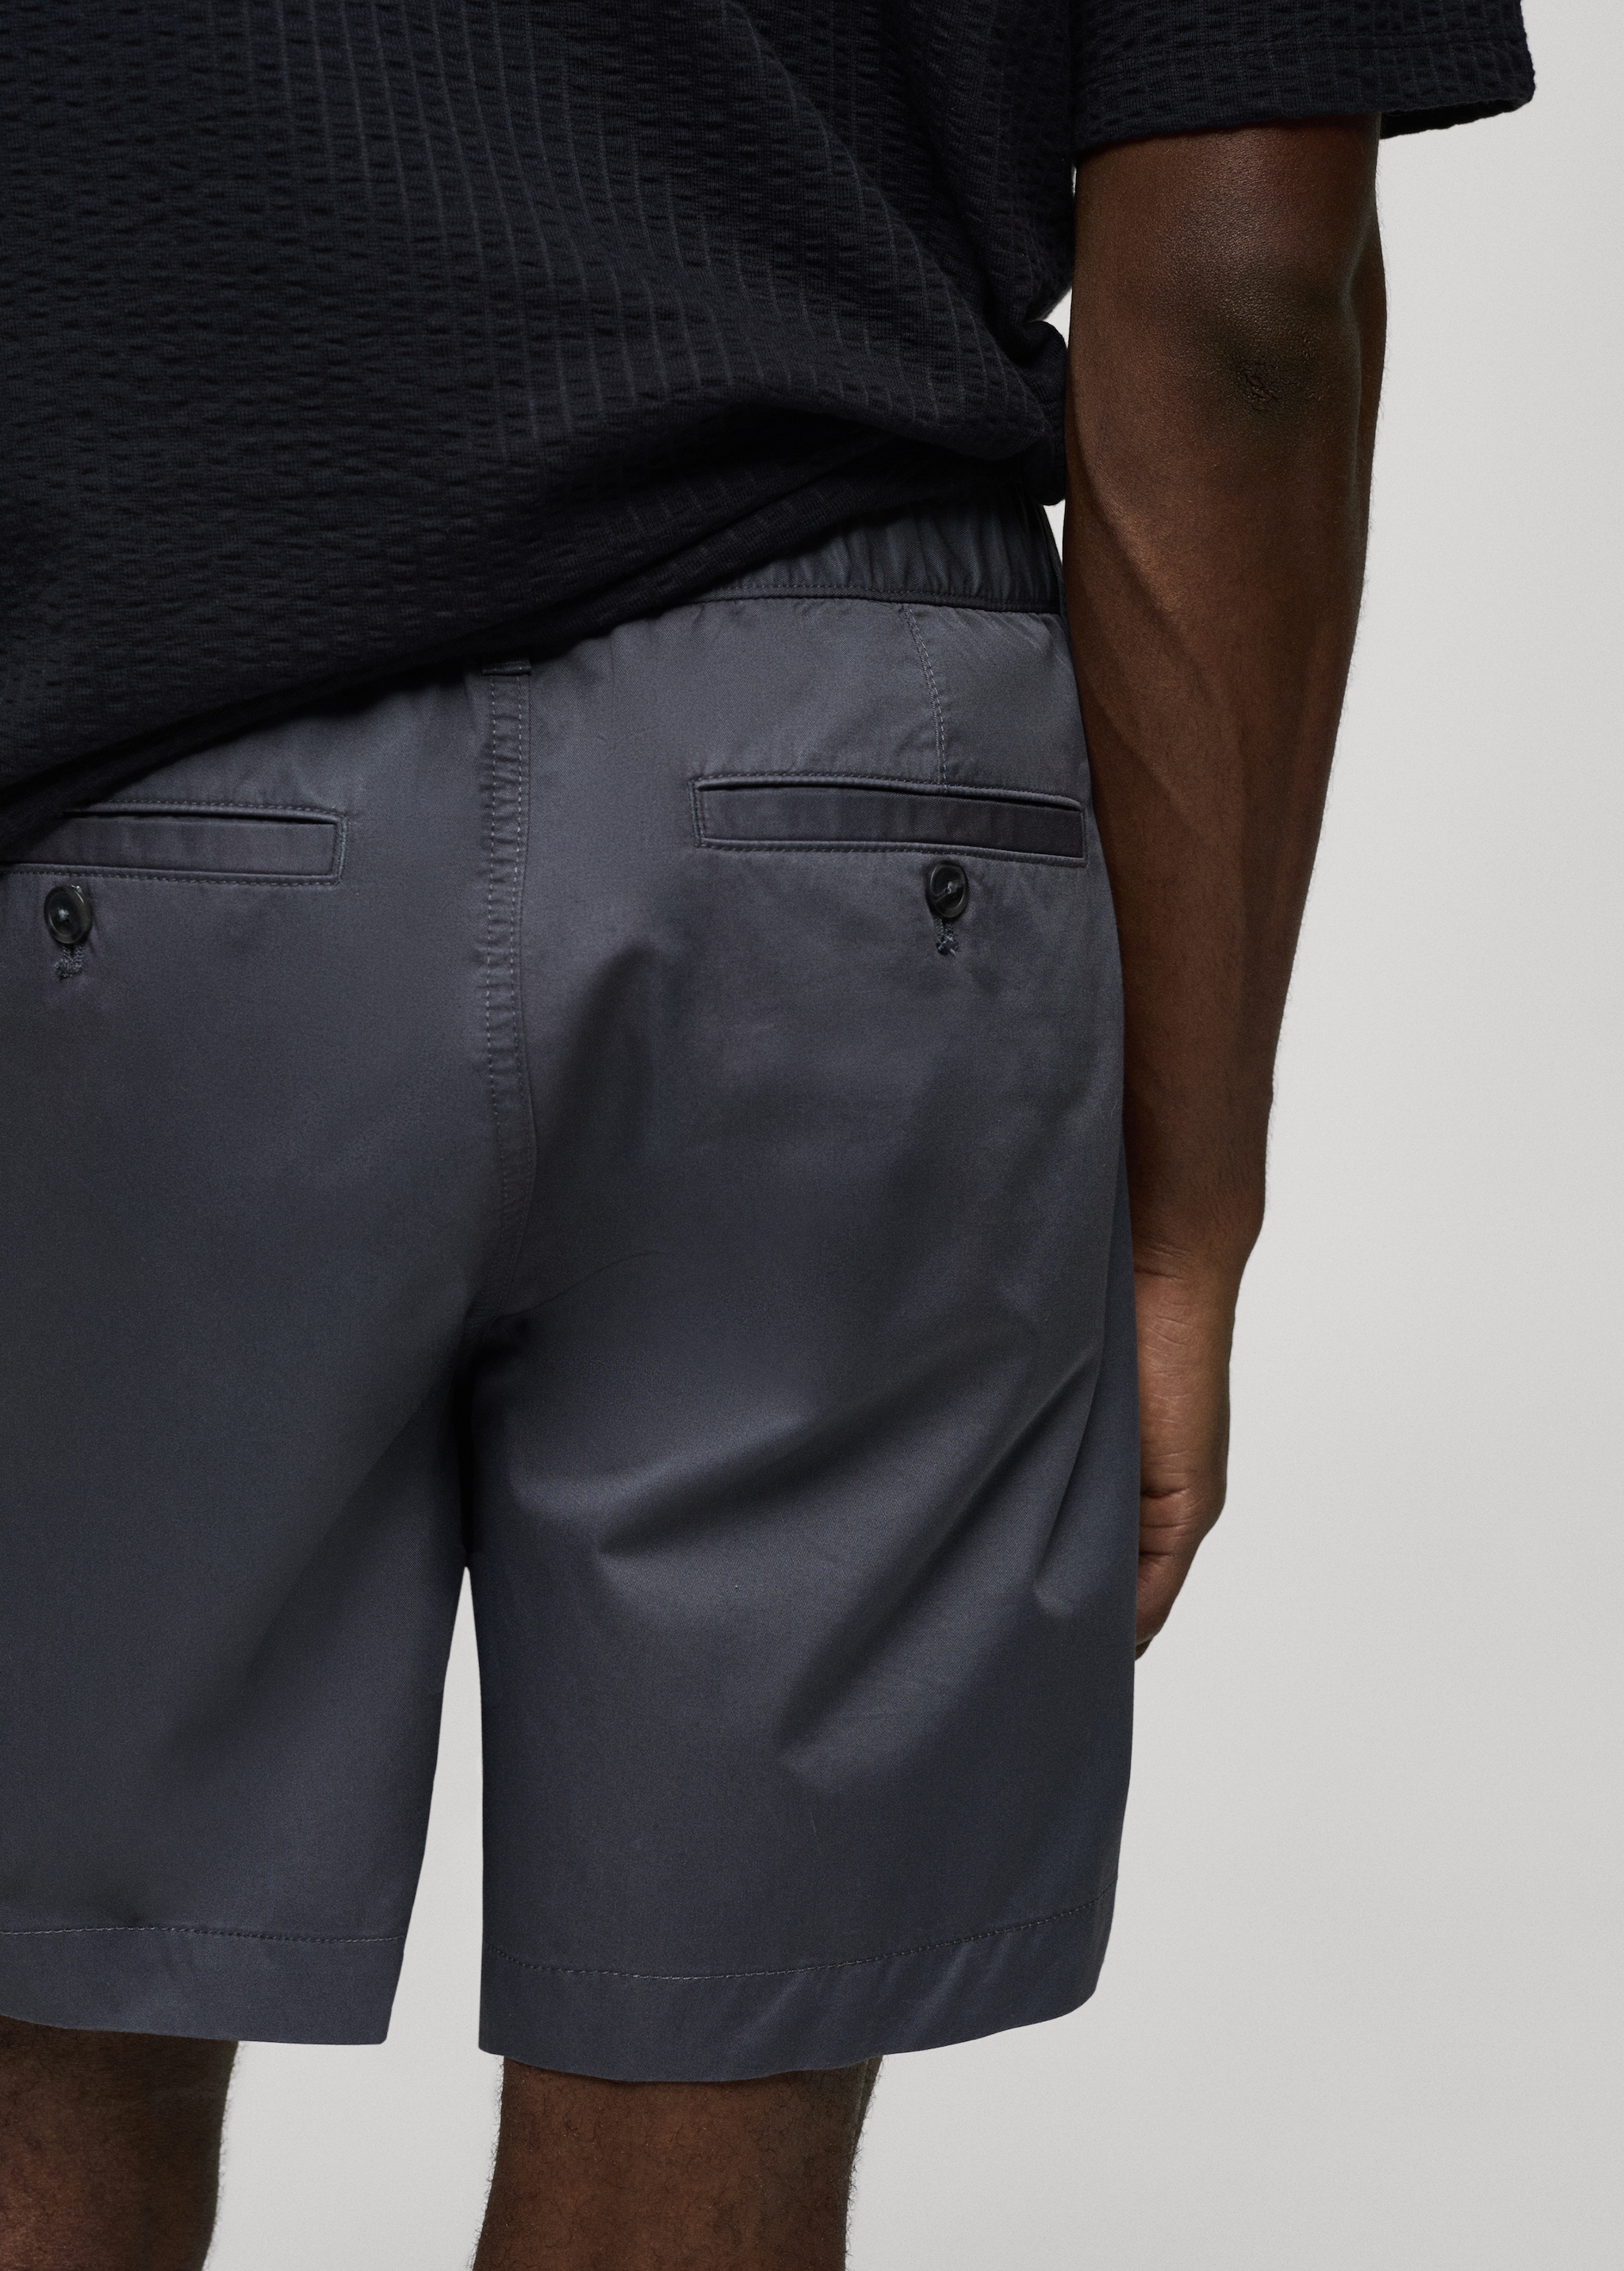 100% cotton drawstring Bermuda shorts - Details of the article 4